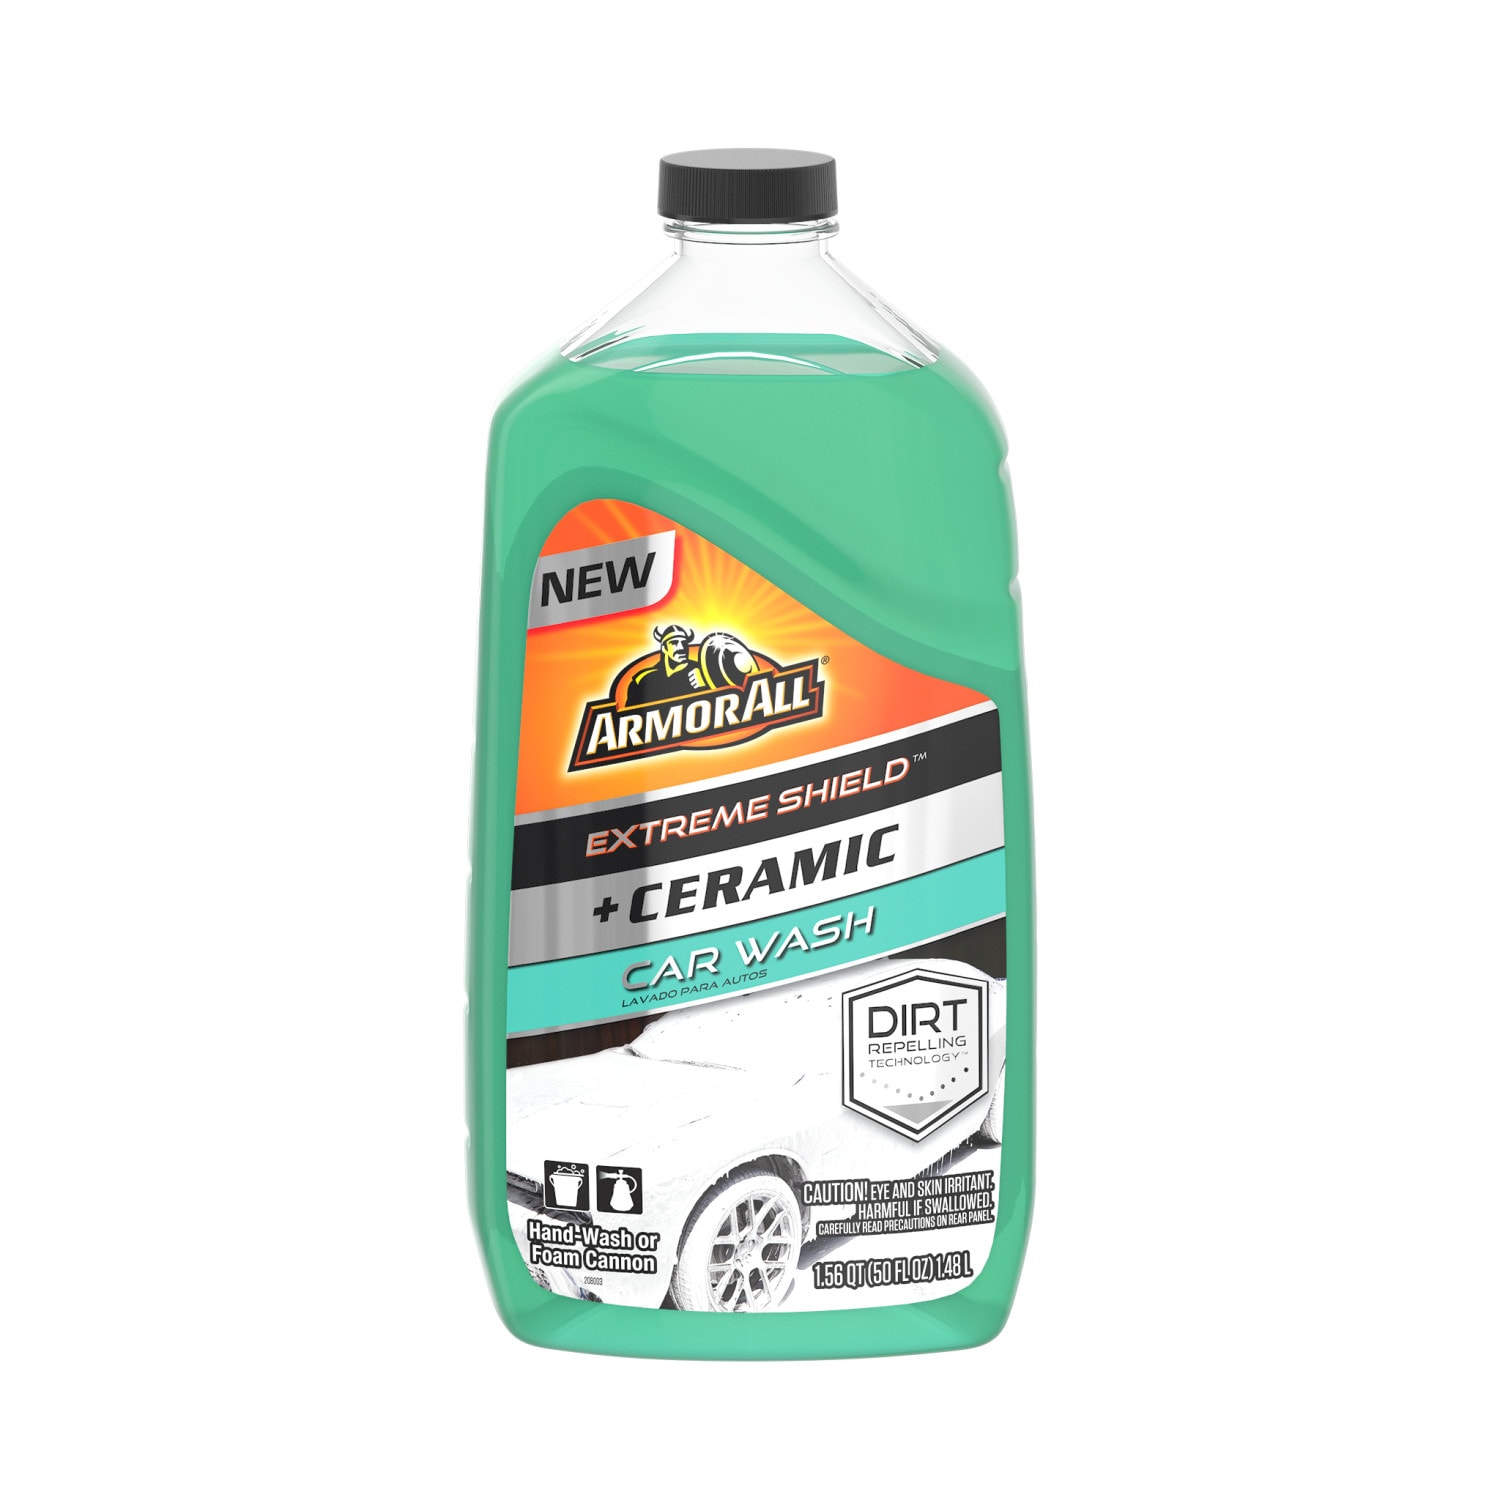  Armor All Ceramic Foaming Car Wash Soap with Extreme Shield, 50  Fl Oz Each (Pack of 4) : Automotive